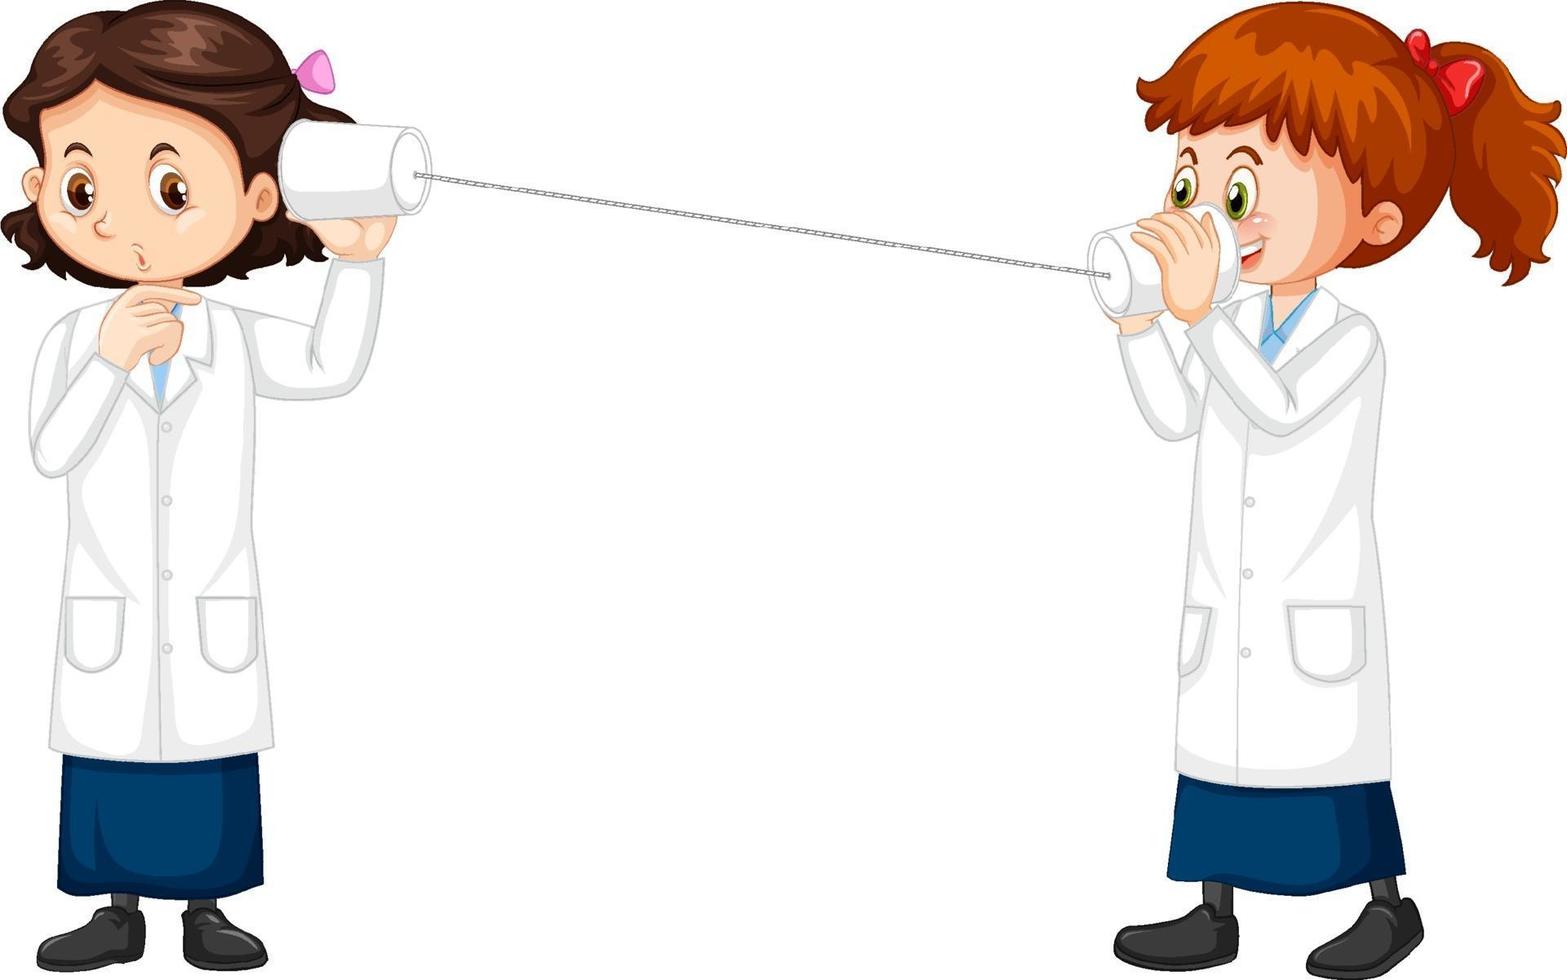 Two scientist girls cartoon character string phone experiment vector